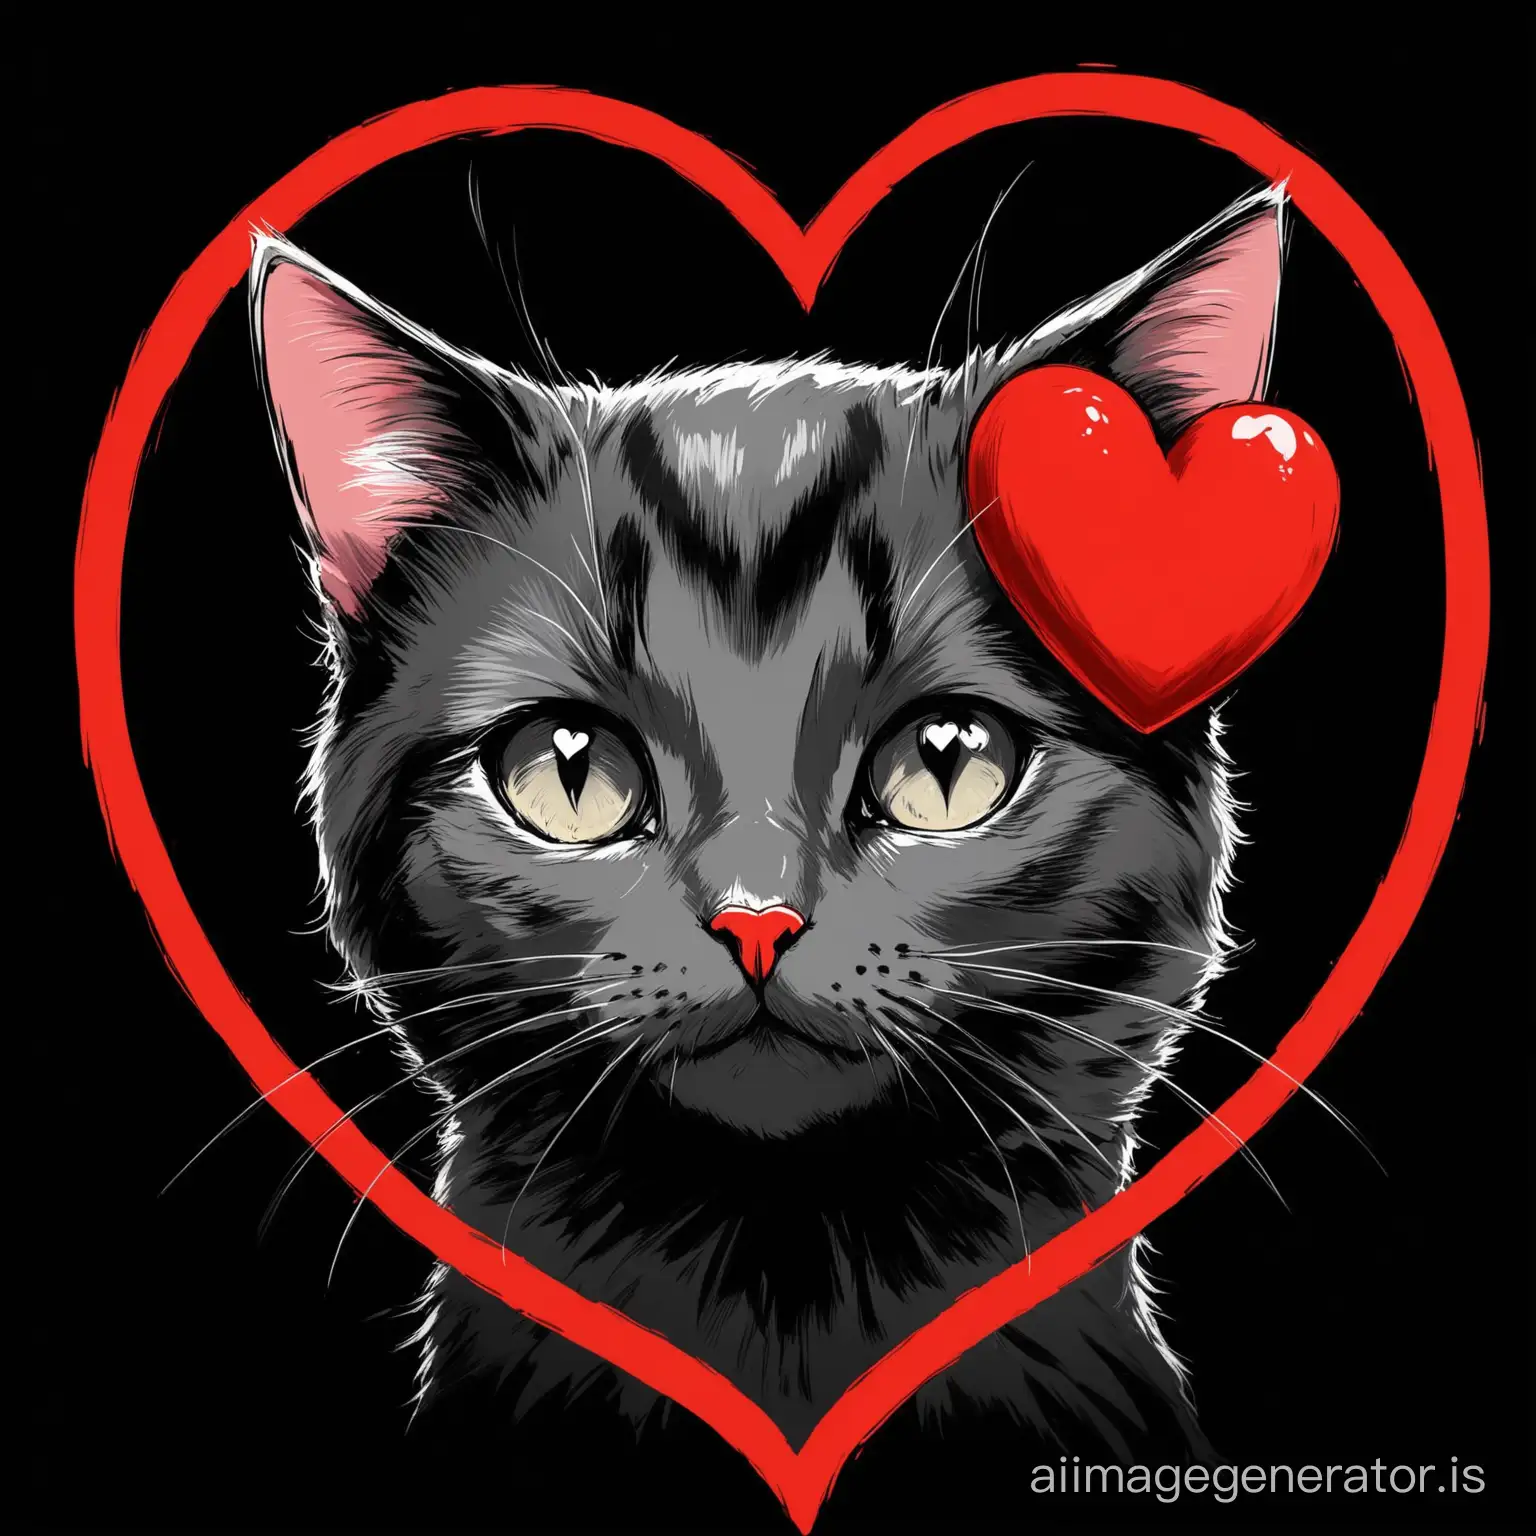 Picture Koтик bites heart, drawn in black and red, art, 4K, black background with heart, cat with gray eyes.